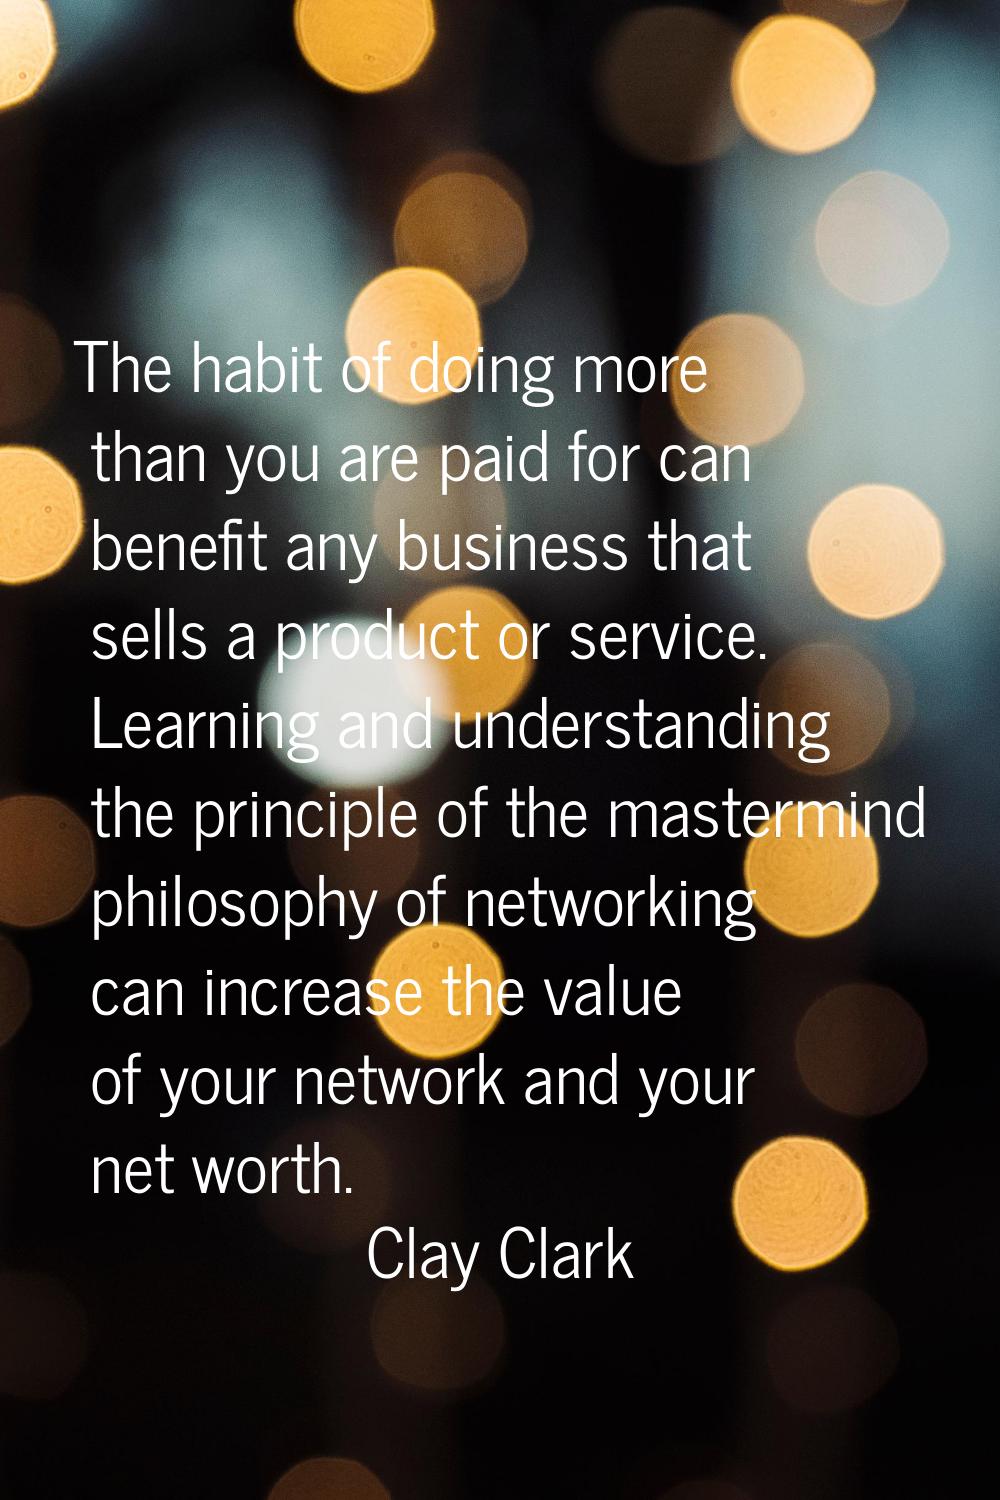 The habit of doing more than you are paid for can benefit any business that sells a product or serv